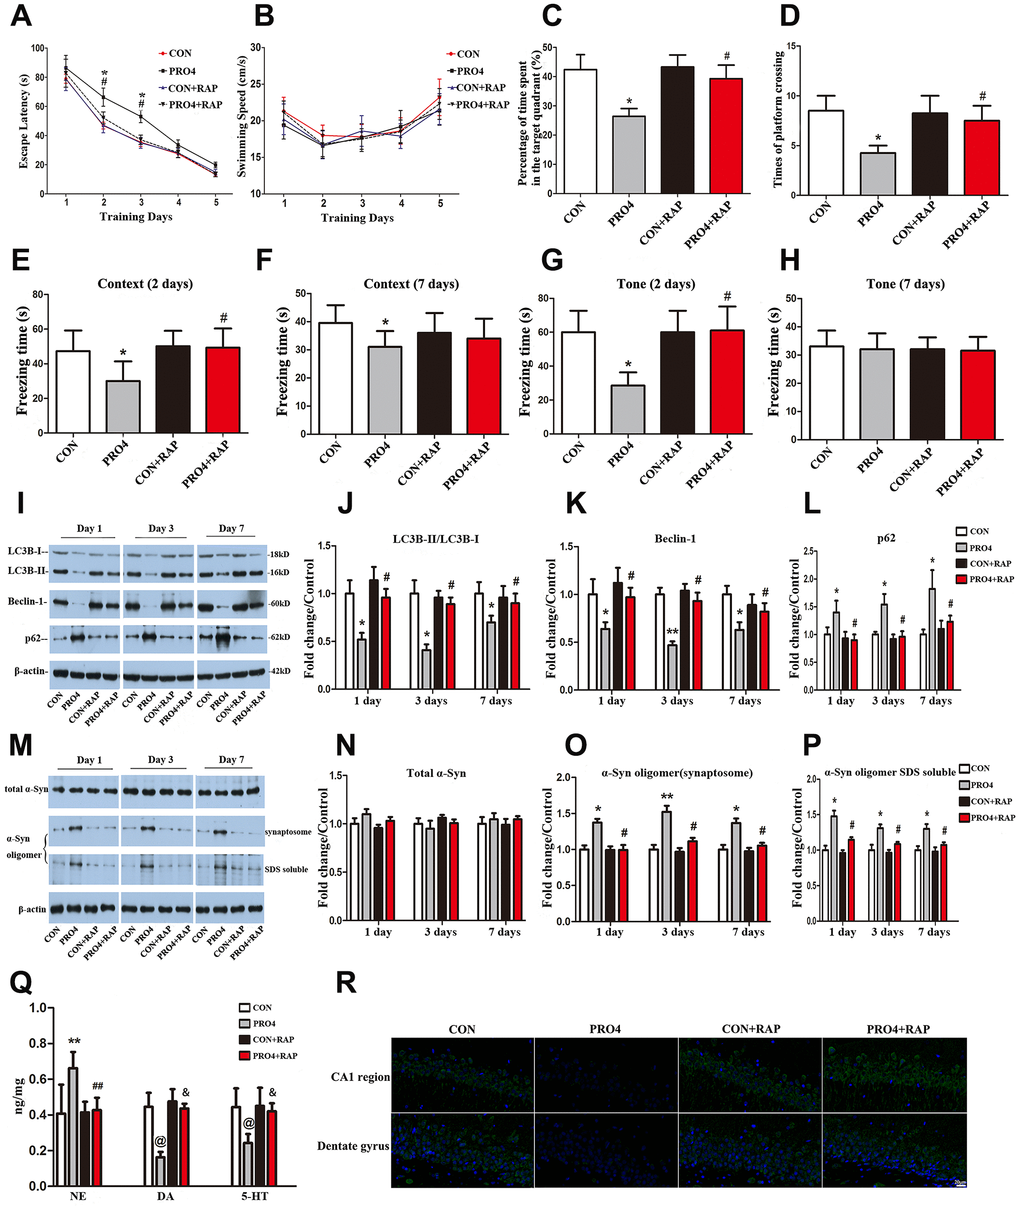 The effects of an autophagy agonist on propofol-induced changes in behavior, autophagy-related protein levels and α-synuclein levels in the hippocampus in aged rats. (A) Rapamycin (RAP) reversed the propofol anesthesia (4 h)-induced increase in escape latency. (B) Propofol anesthesia (4 h) and/or rapamycin did not alter the swimming speed. (C, D) Rapamycin reversed the propofol anesthesia (4 h)-induced decreases in the target quadrant dwelling time and the number of platform crossings. (E, F) Rapamycin ameliorated the propofol anesthesia (4 h)-induced decrease in the freezing time in the context test 2 and 7 days after anesthesia. (G, H) Rapamycin ameliorated the propofol anesthesia (4 h)-induced decrease in the freezing time in the tone test 2 and 7 days after anesthesia. (I) Representative immunoblots illustrating the effects of rapamycin on the propofol anesthesia (4 h)-induced changes in hippocampal autophagy-related protein levels. (J) Rapamycin reversed the propofol anesthesia (4 h)-induced decrease in LC3B expression in the hippocampus. (K) Rapamycin reversed the propofol anesthesia (4 h)-induced decrease in Beclin-1 expression in the hippocampus. (L) Rapamycin reversed the propofol anesthesia (4 h)-induced increase in p62 expression in the hippocampus. (M) Representative immunoblots illustrating the effects of rapamycin on the propofol anesthesia (4 h)-induced changes in α-synuclein (α-Syn) levels in the hippocampus. (N) Rapamycin did not alter total α-synuclein levels. (O, P) Rapamycin reversed the propofol anesthesia (4 h)-induced increases in α-synuclein oligomer levels in synaptosomes and SDS-solubilized fractions in the hippocampus. (Q) Rapamycin reversed the propofol anesthesia (4 h)-induced changes in neurotransmitter levels in the hippocampus. (R) Representative confocal staining of LC3B expression in the CA1 and DG regions of the hippocampus in the four groups of rats 7 days after propofol anesthesia. Values are expressed as the mean ± SEM (n = 10 per group for behavioral tests, n = 8 per group for neurotransmitter detection, n = 6 per group for Western blot analysis, n = 4 per group for confocal analysis of LC3B staining). *p p @p p p &p R).